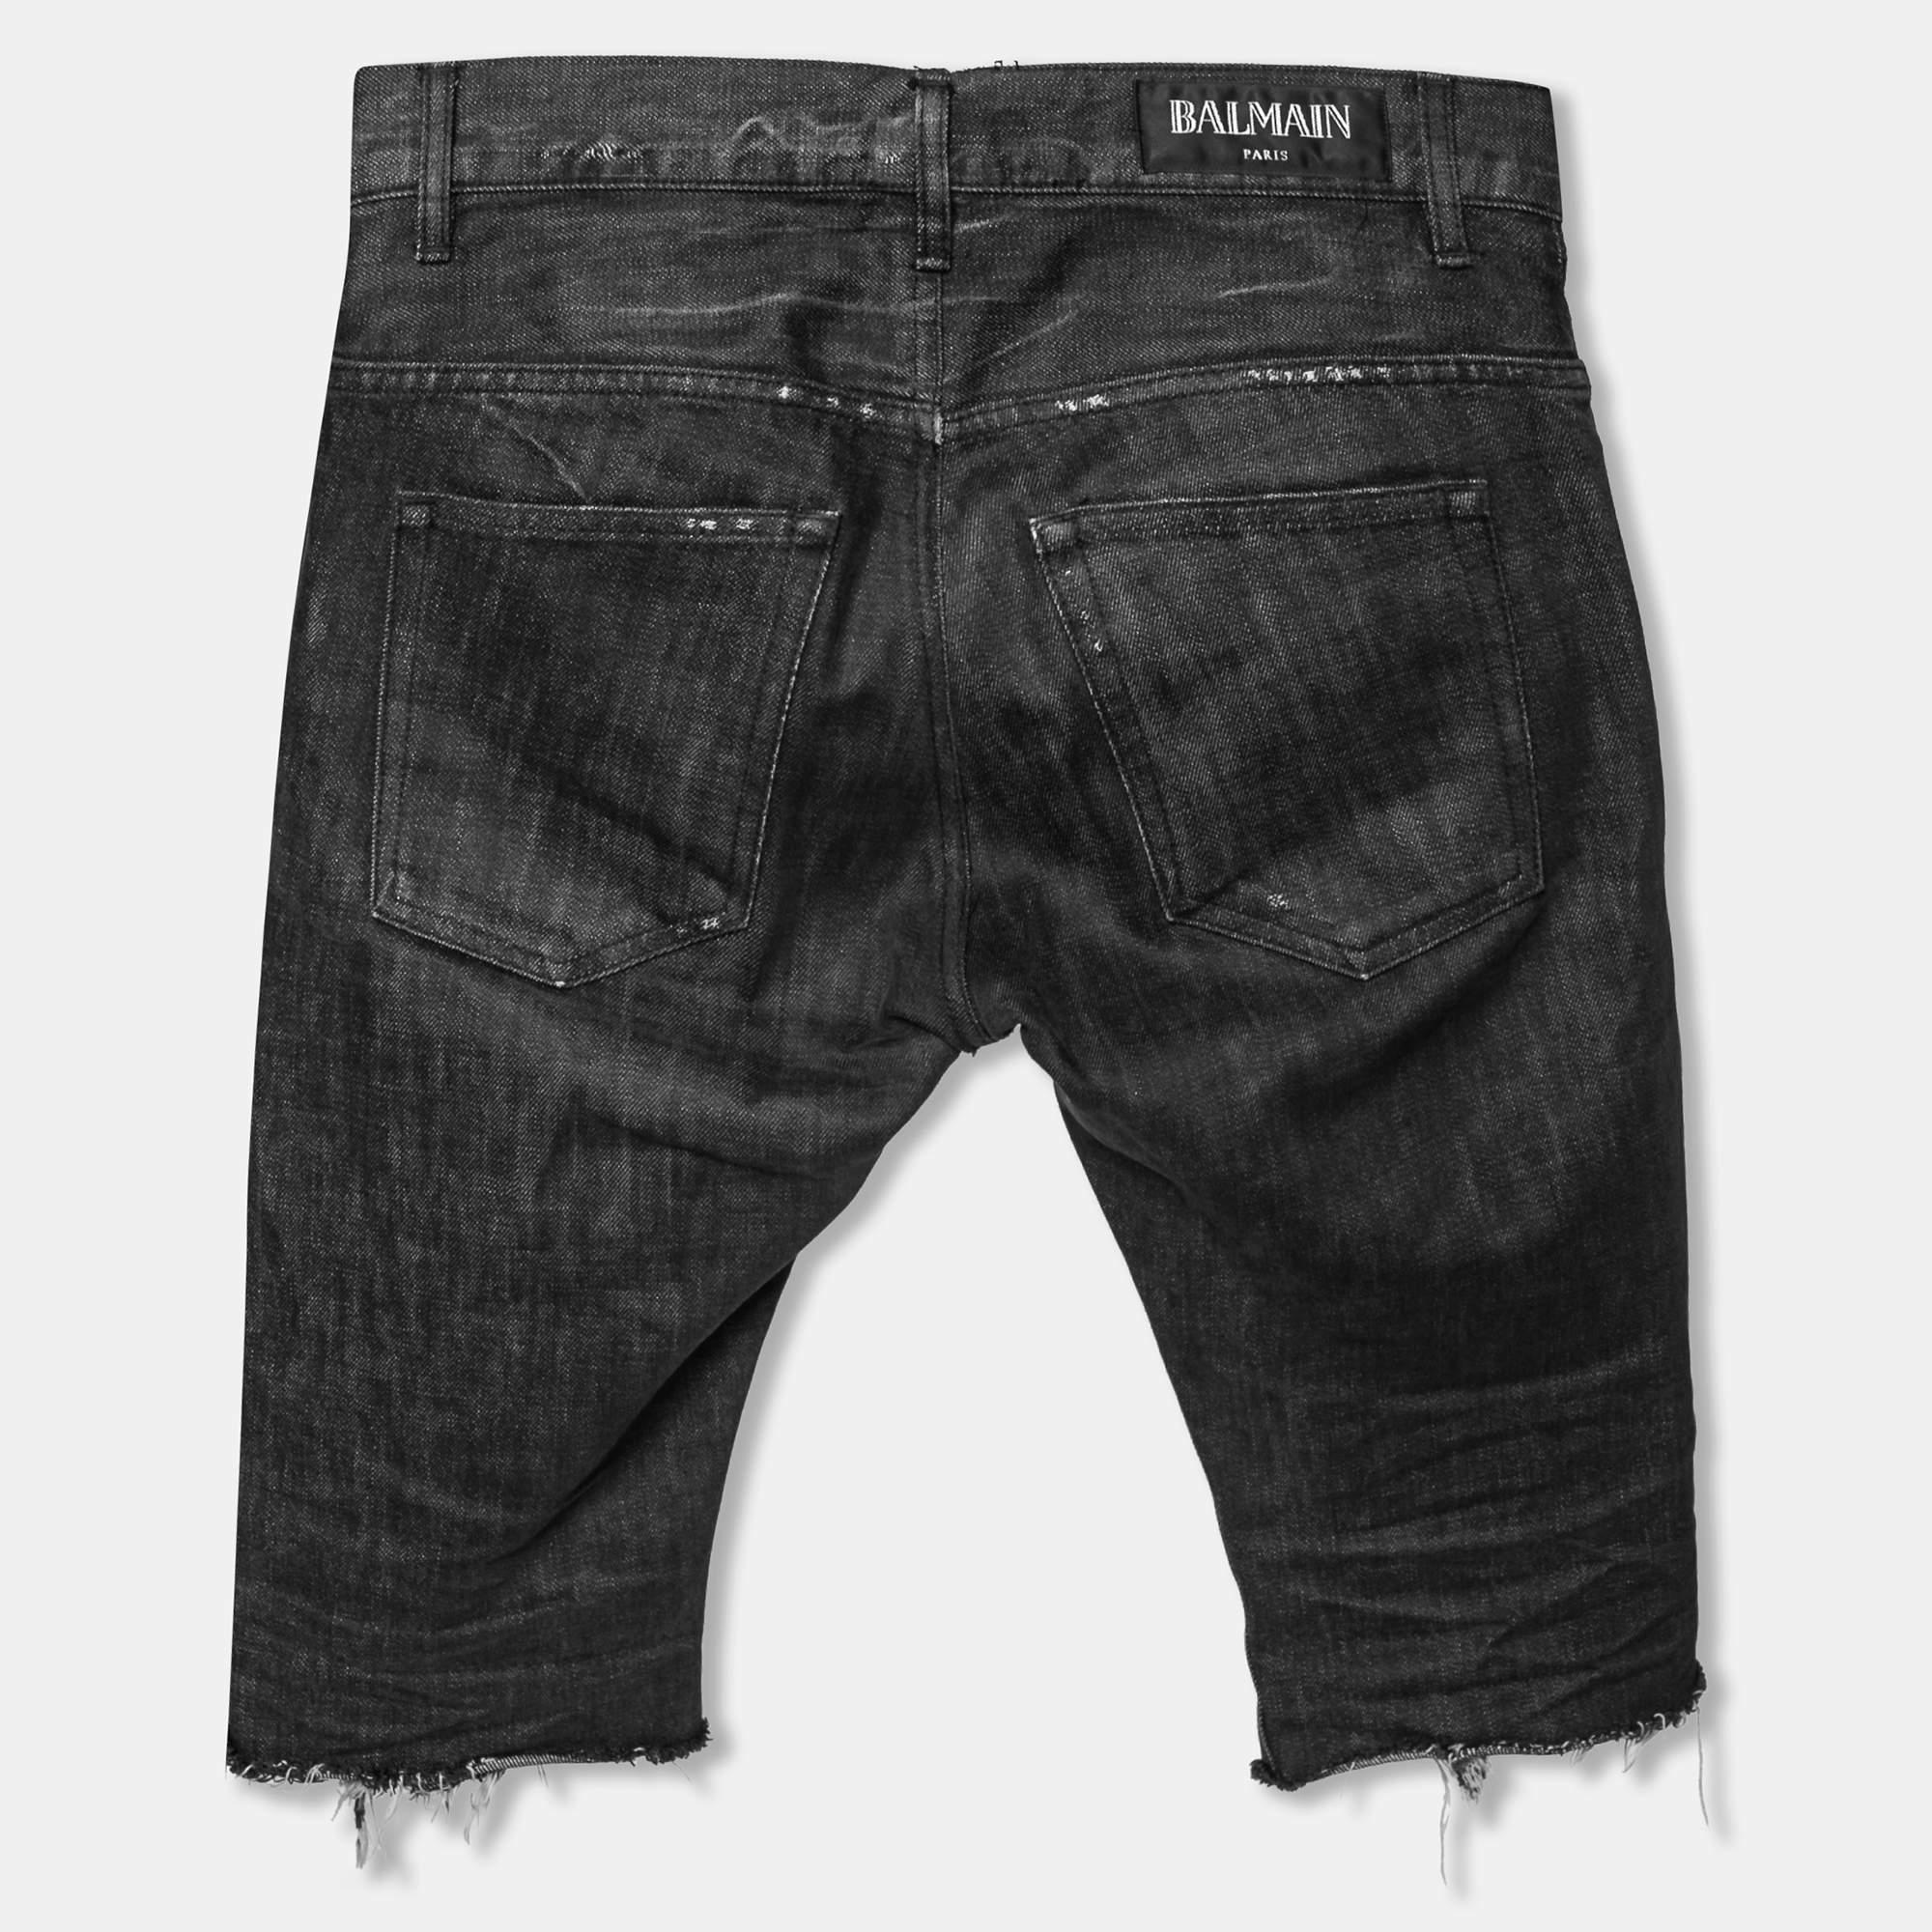 An edgy pair of shorts to add to your wardrobe is this grey one from Balmain. Made from comfortable cotton, these shorts feature a distressed design, frayed edges on the hems, a buttoned closure, and external pockets.

